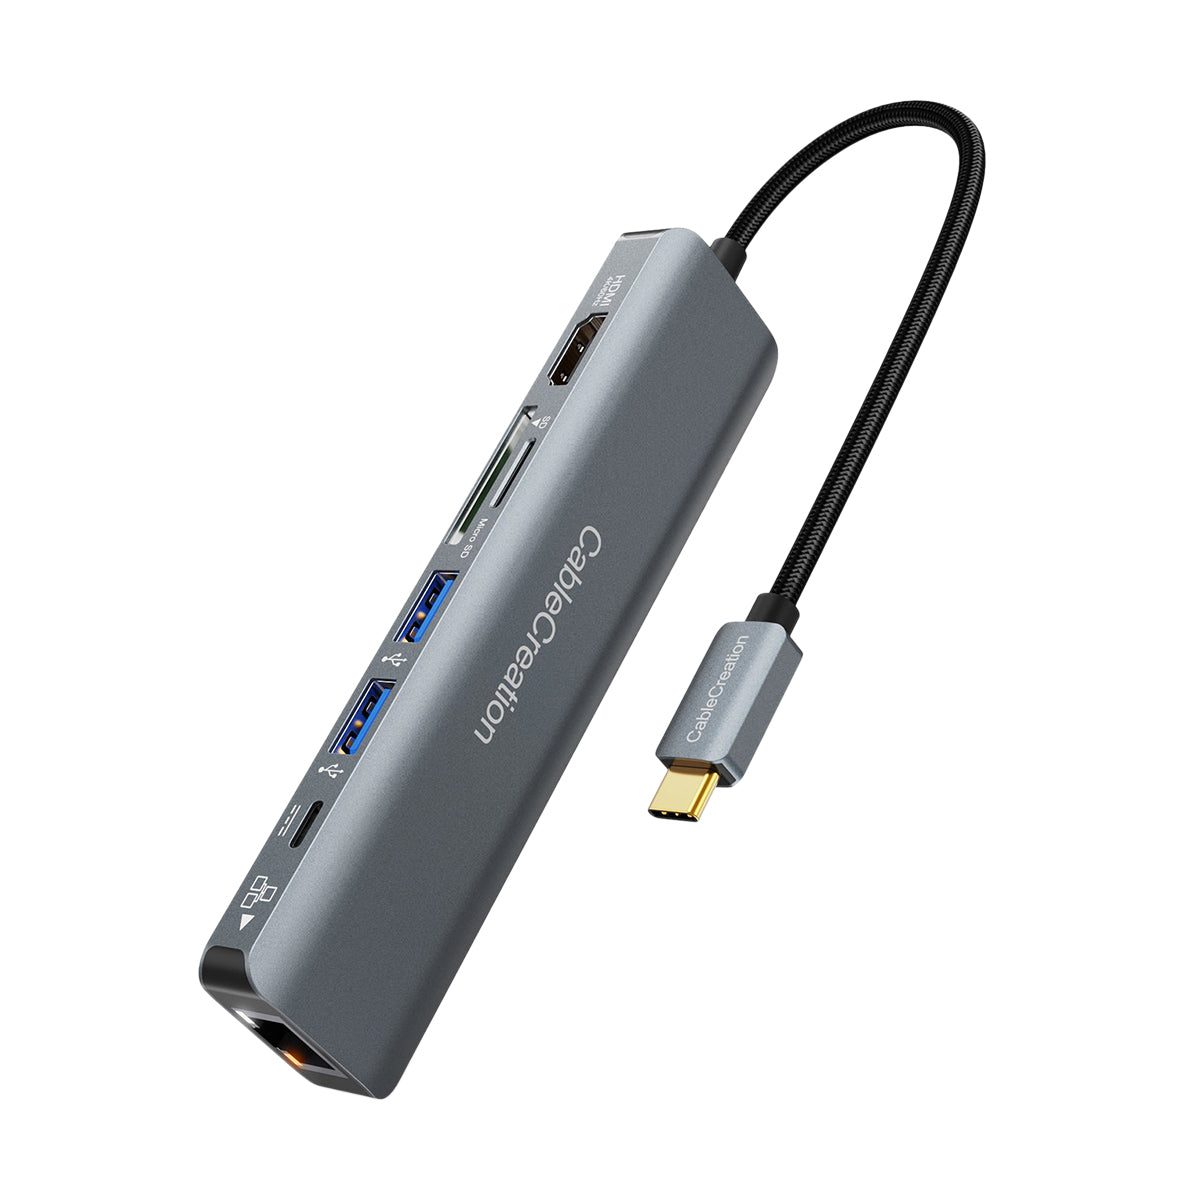 USB-C Ethernet adapter/USB hub with simultaneous charging and access to data